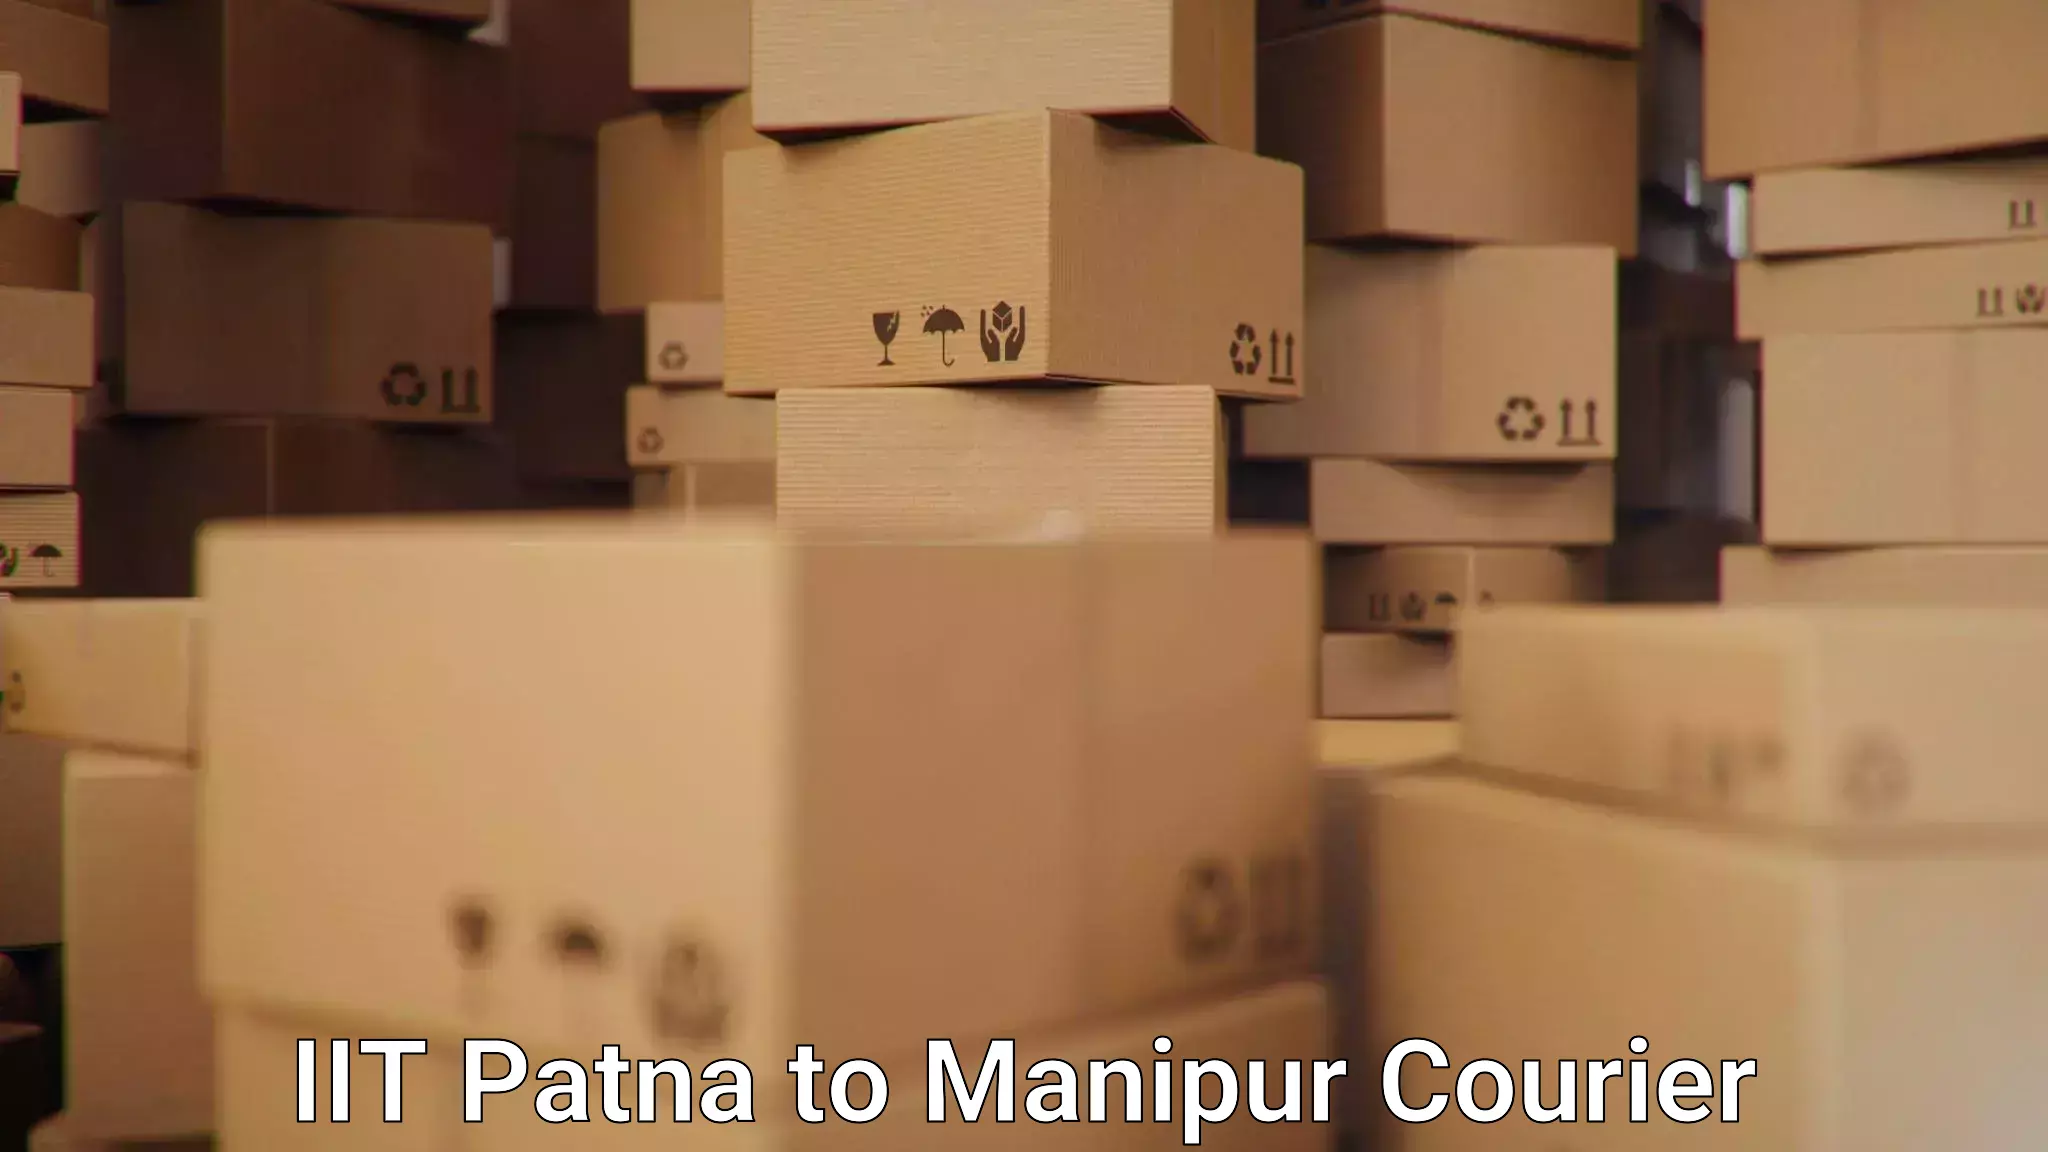 Affordable parcel service IIT Patna to Manipur